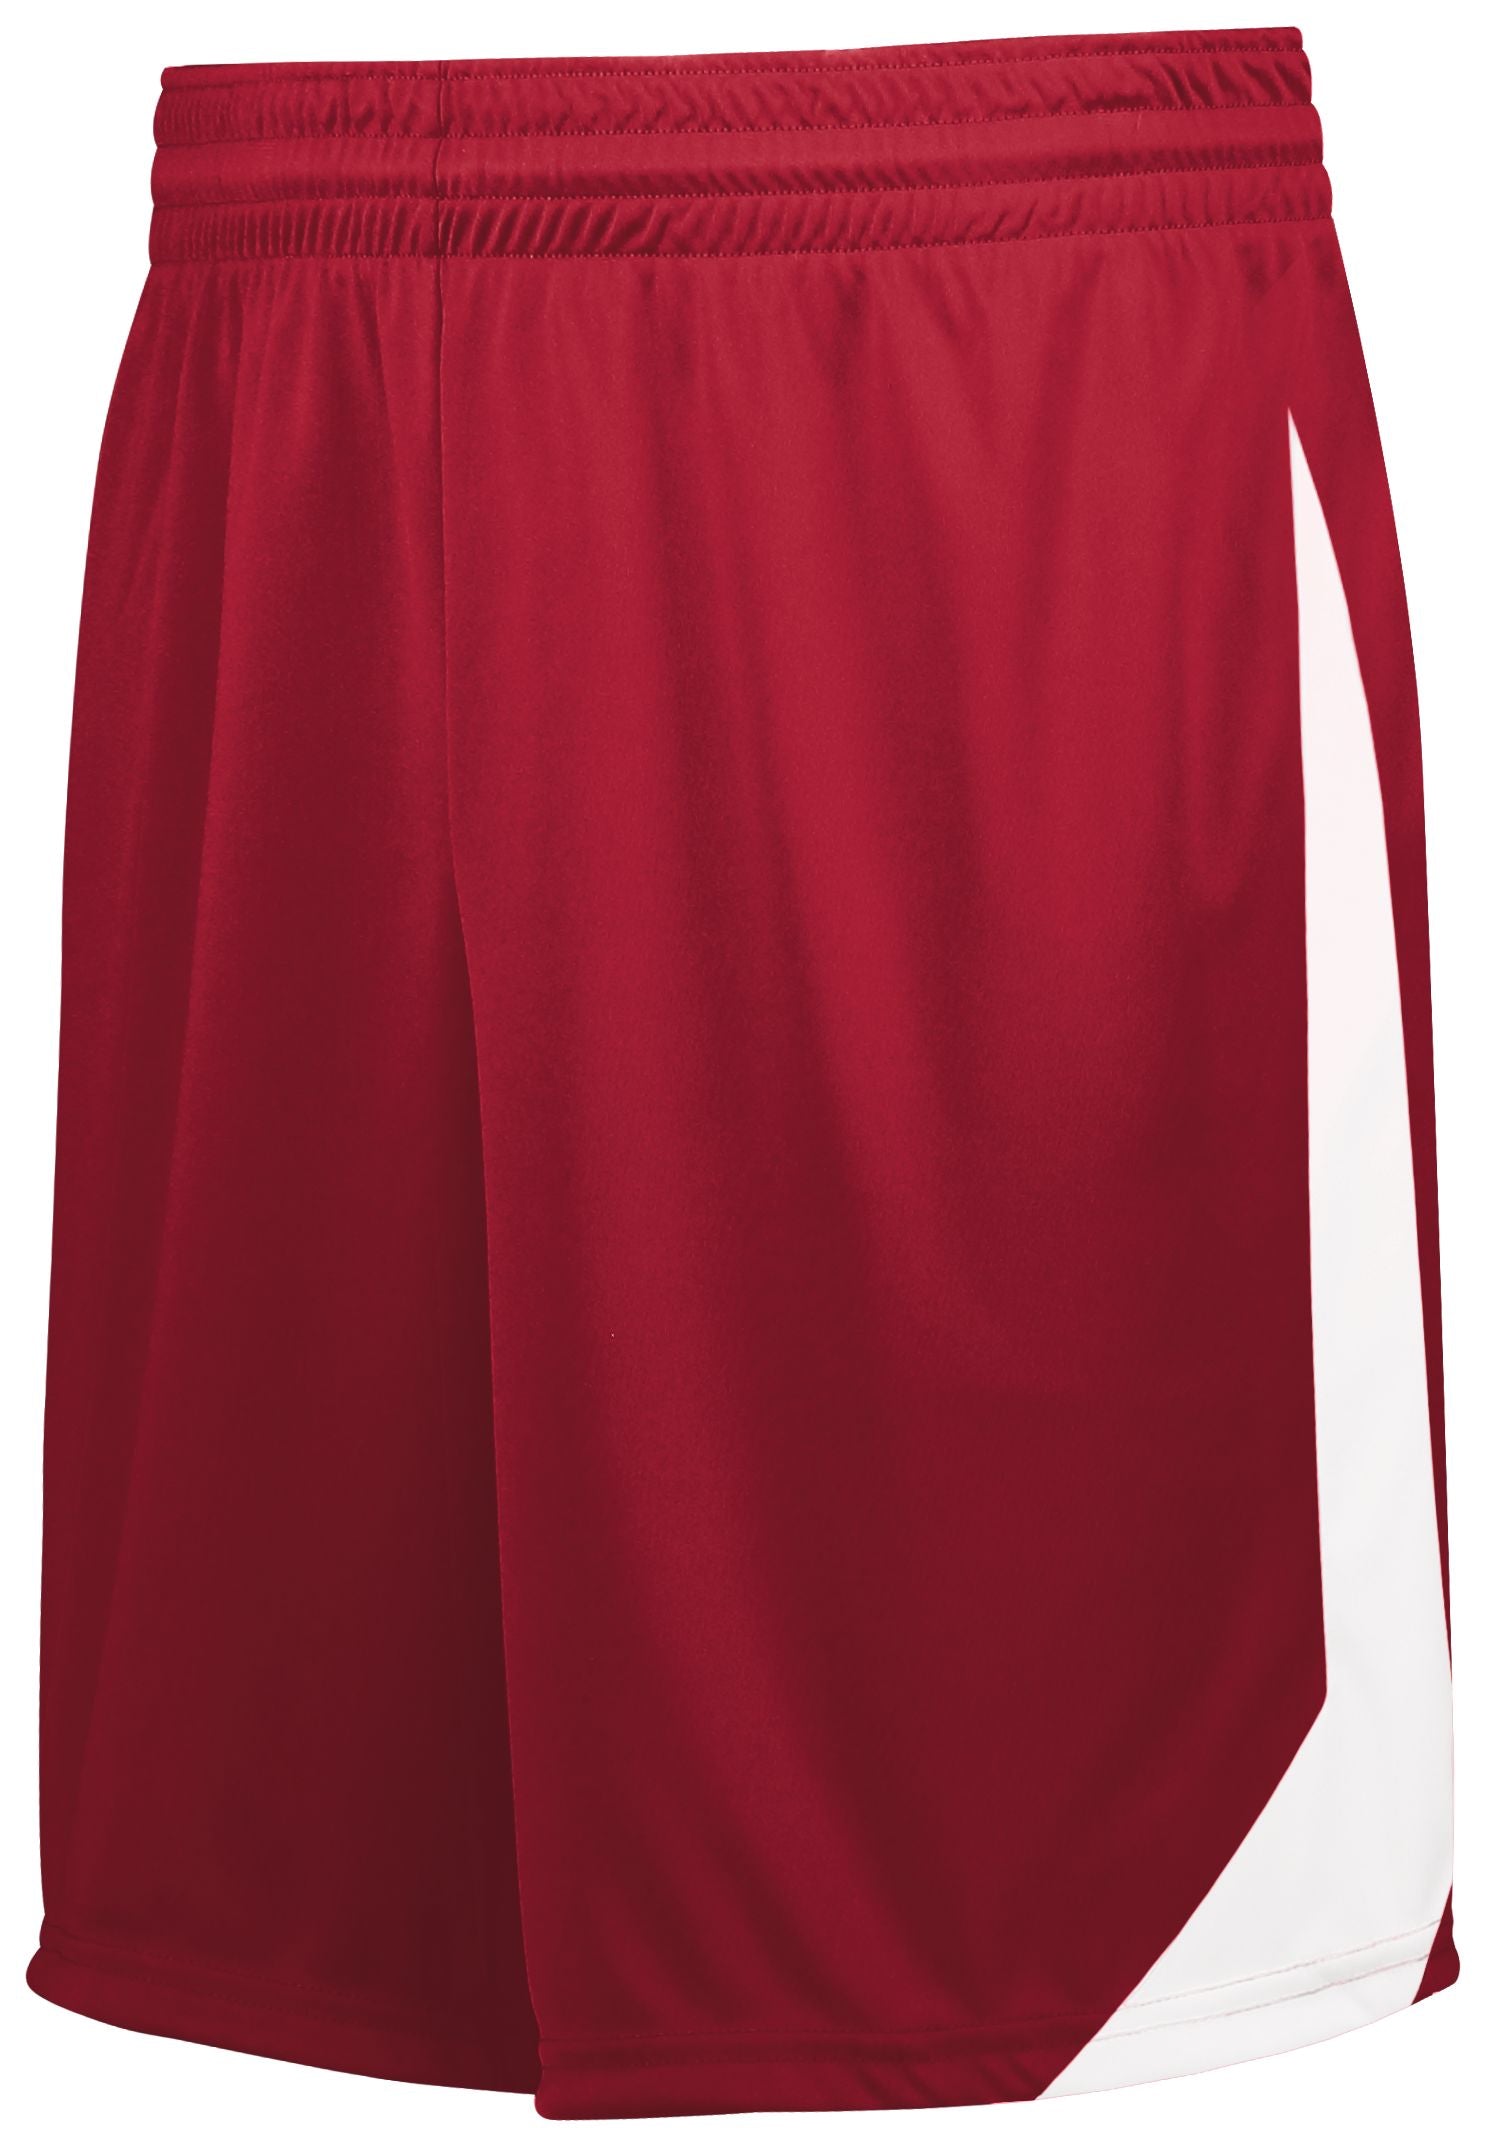 High 5 Youth Athletico Shorts in Scarlet/White  -Part of the Youth, Youth-Shorts, High5-Products, Soccer, All-Sports-1 product lines at KanaleyCreations.com